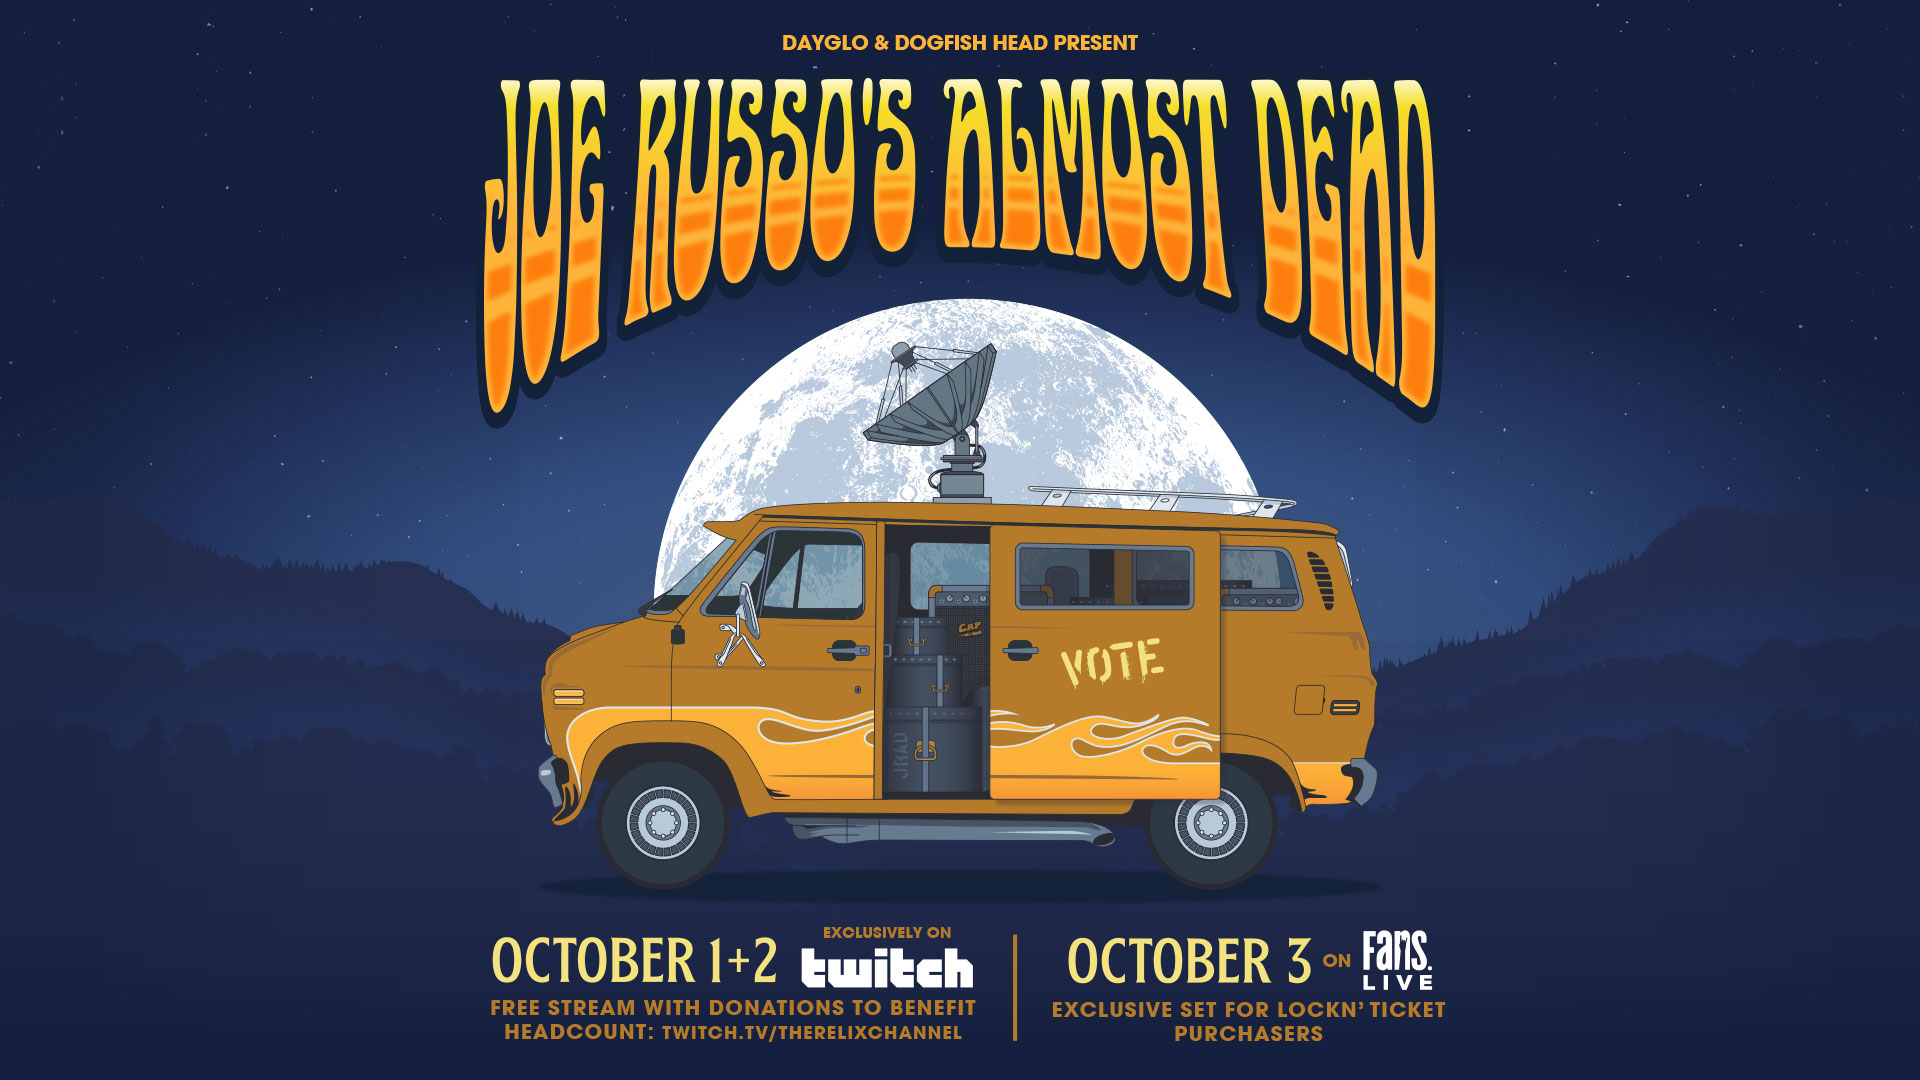 Relix to Debut Twitch Channel with Free Joe Russo’s Almost Dead Livestreams